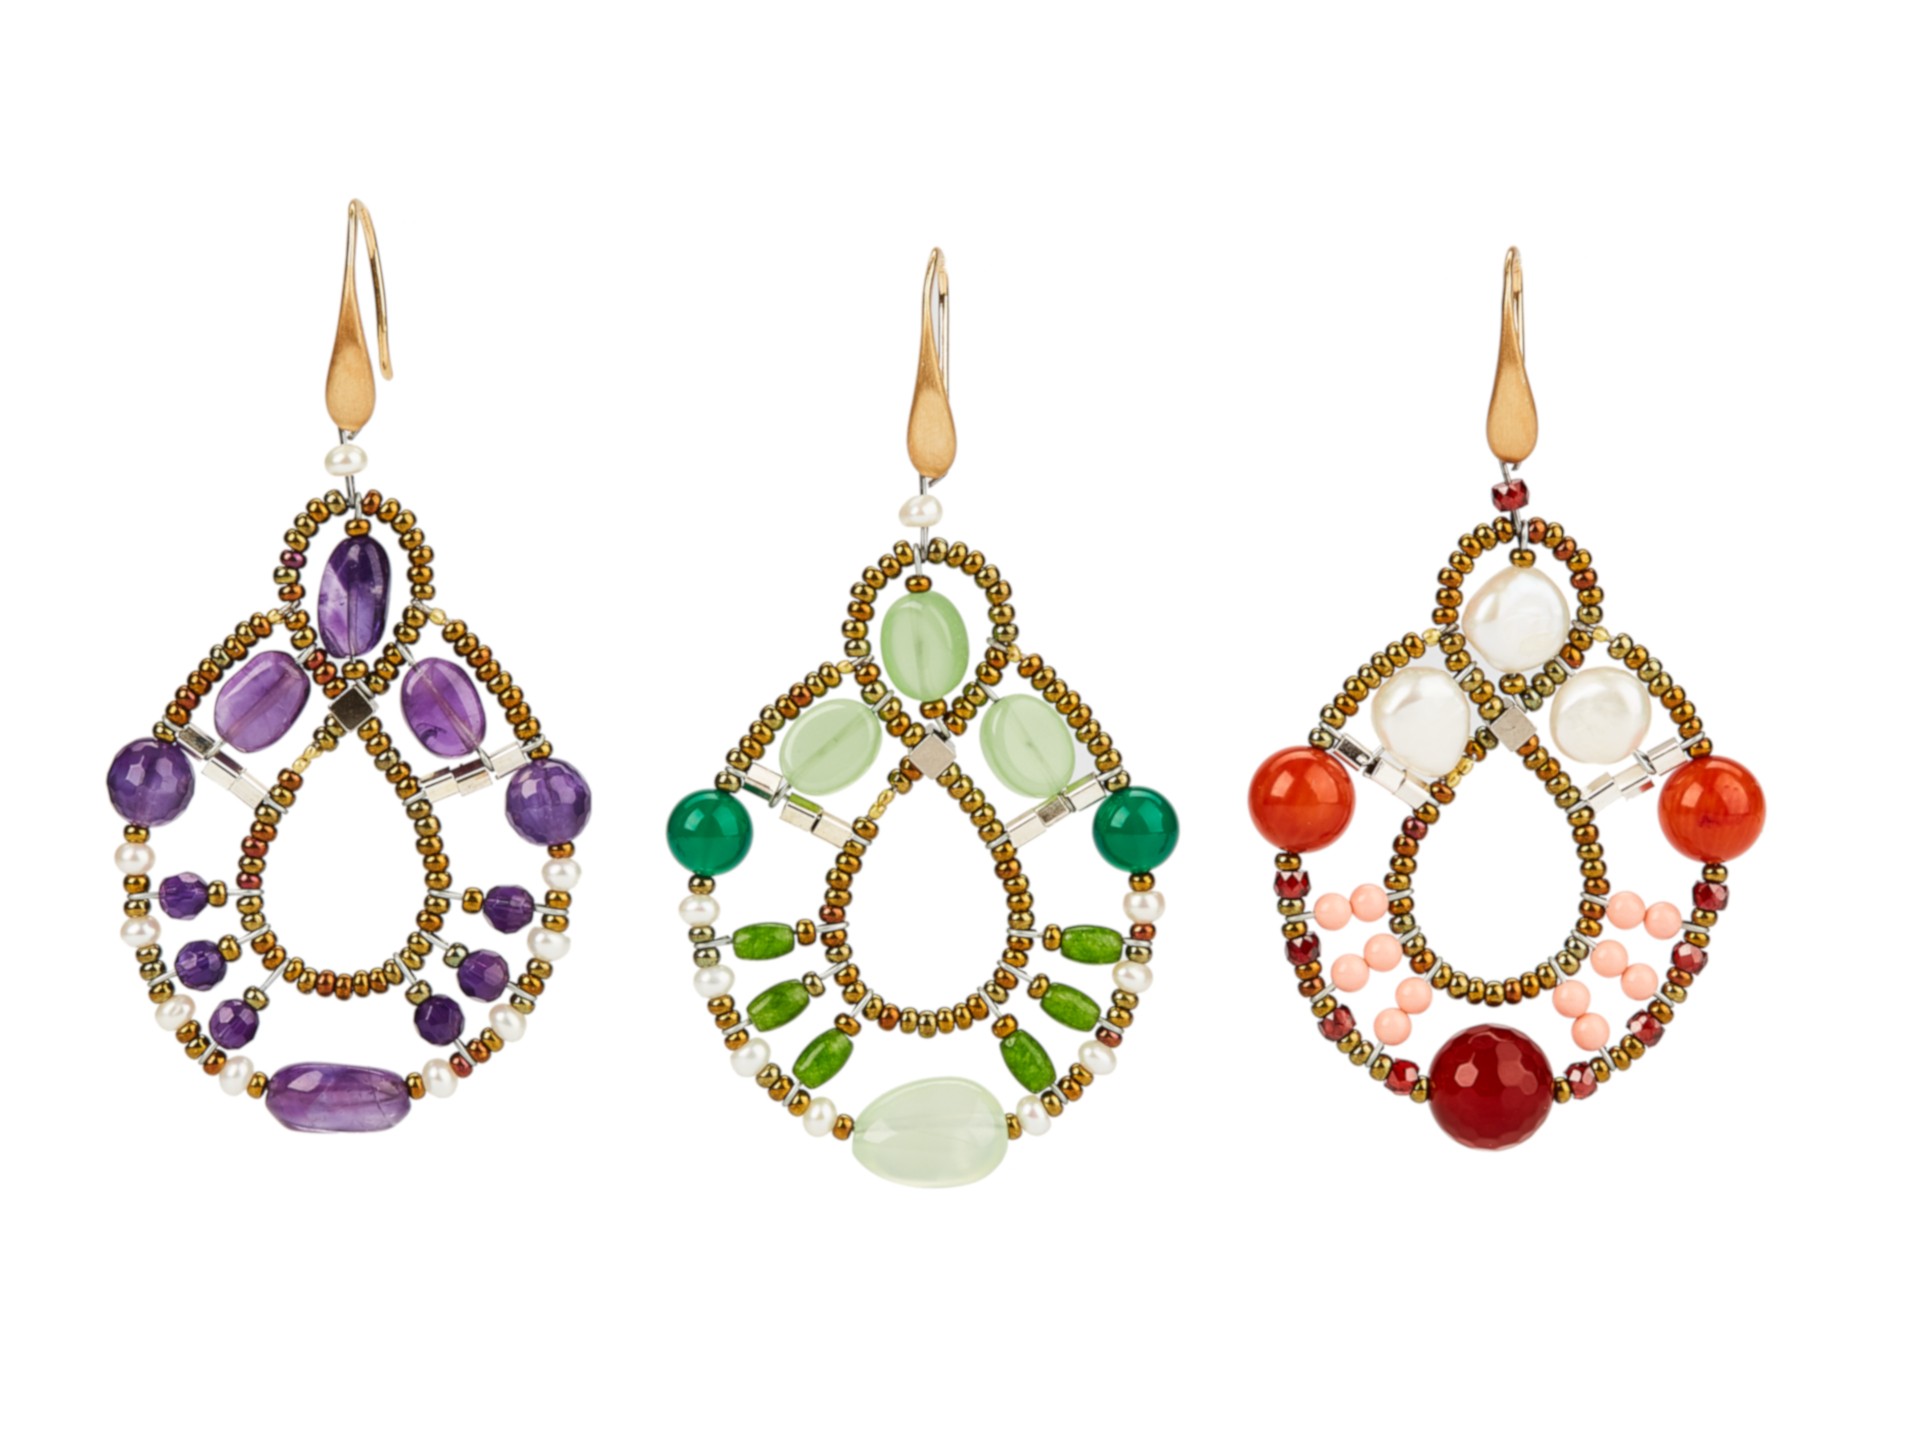 three colored earrings with purple, green and red stones